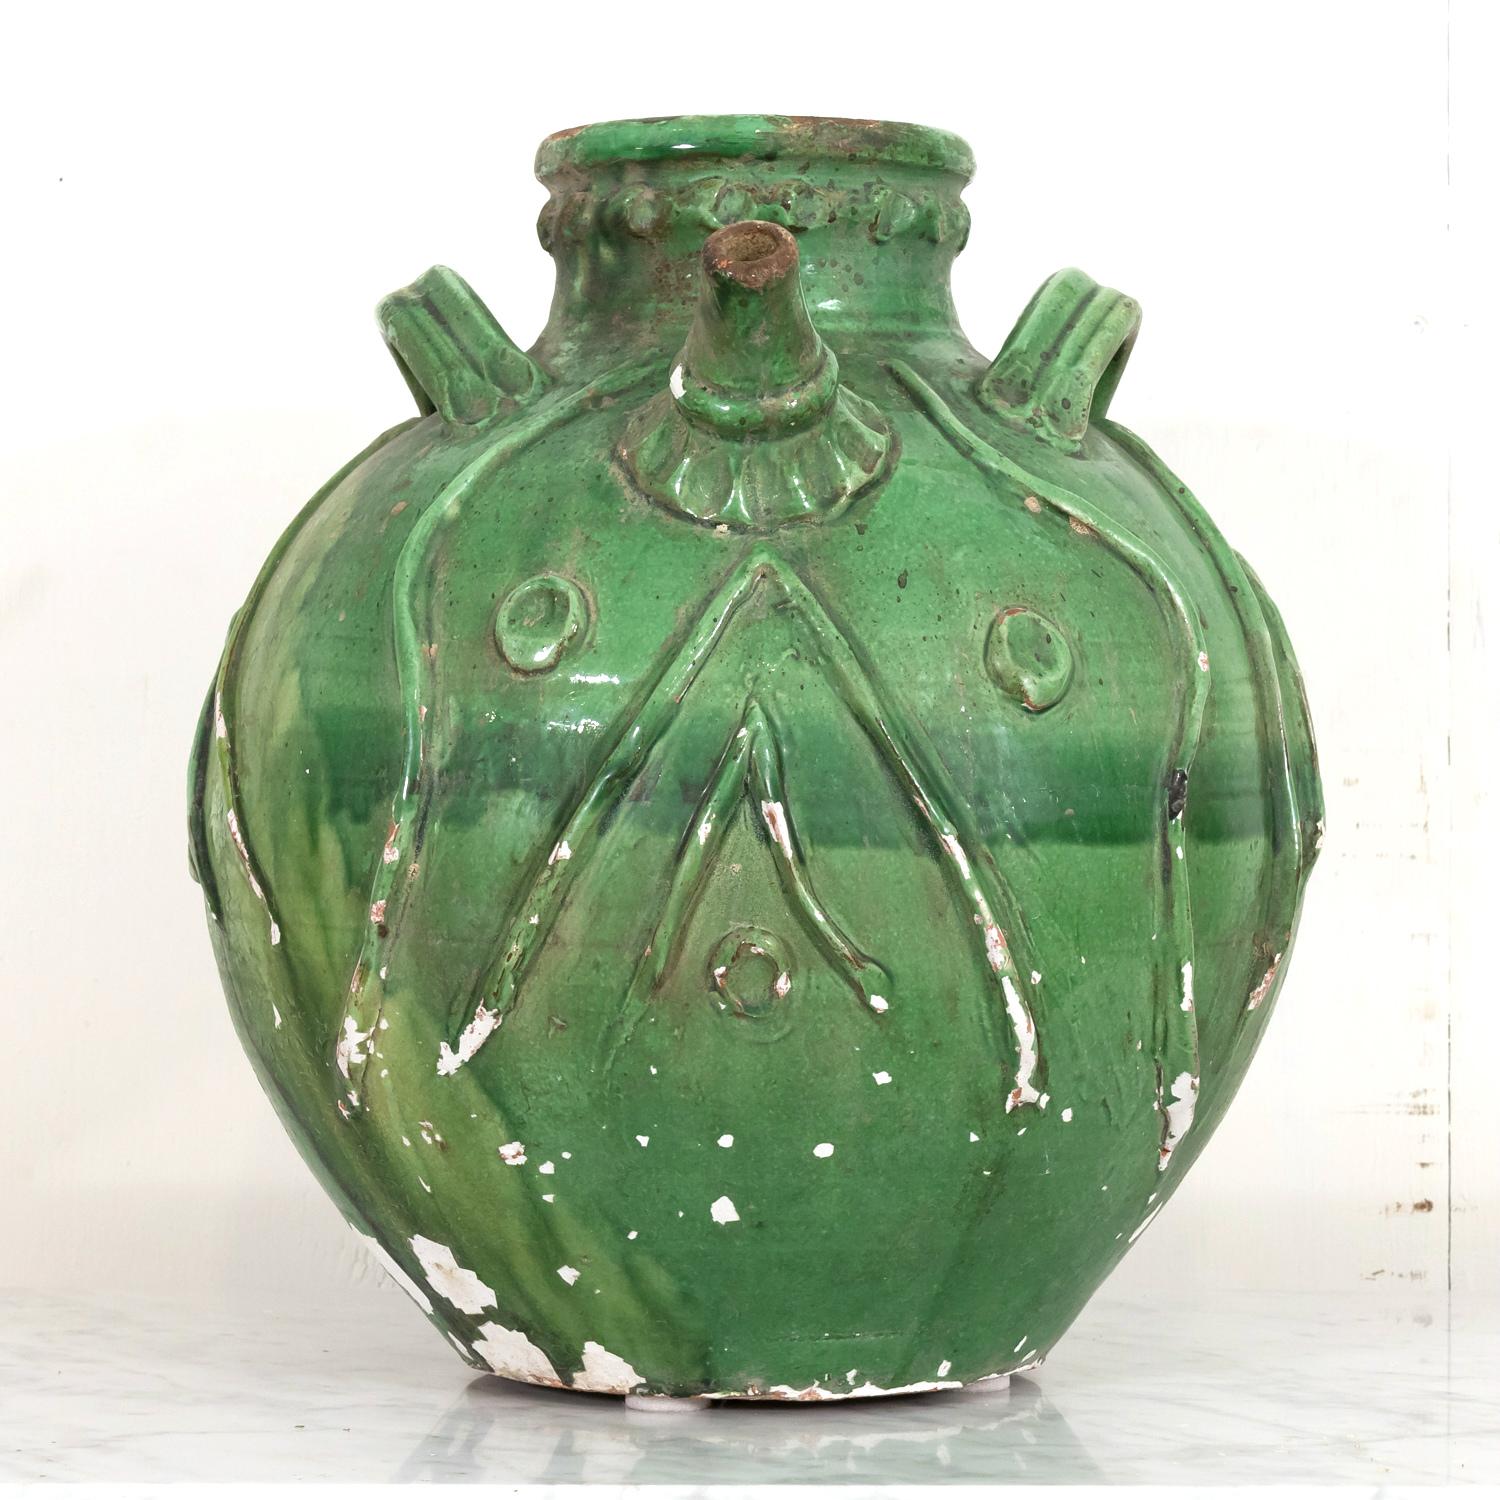 Exceptional Early 19th Century French Glazed Terracotta Walnut Oil Jug In Good Condition For Sale In Birmingham, AL